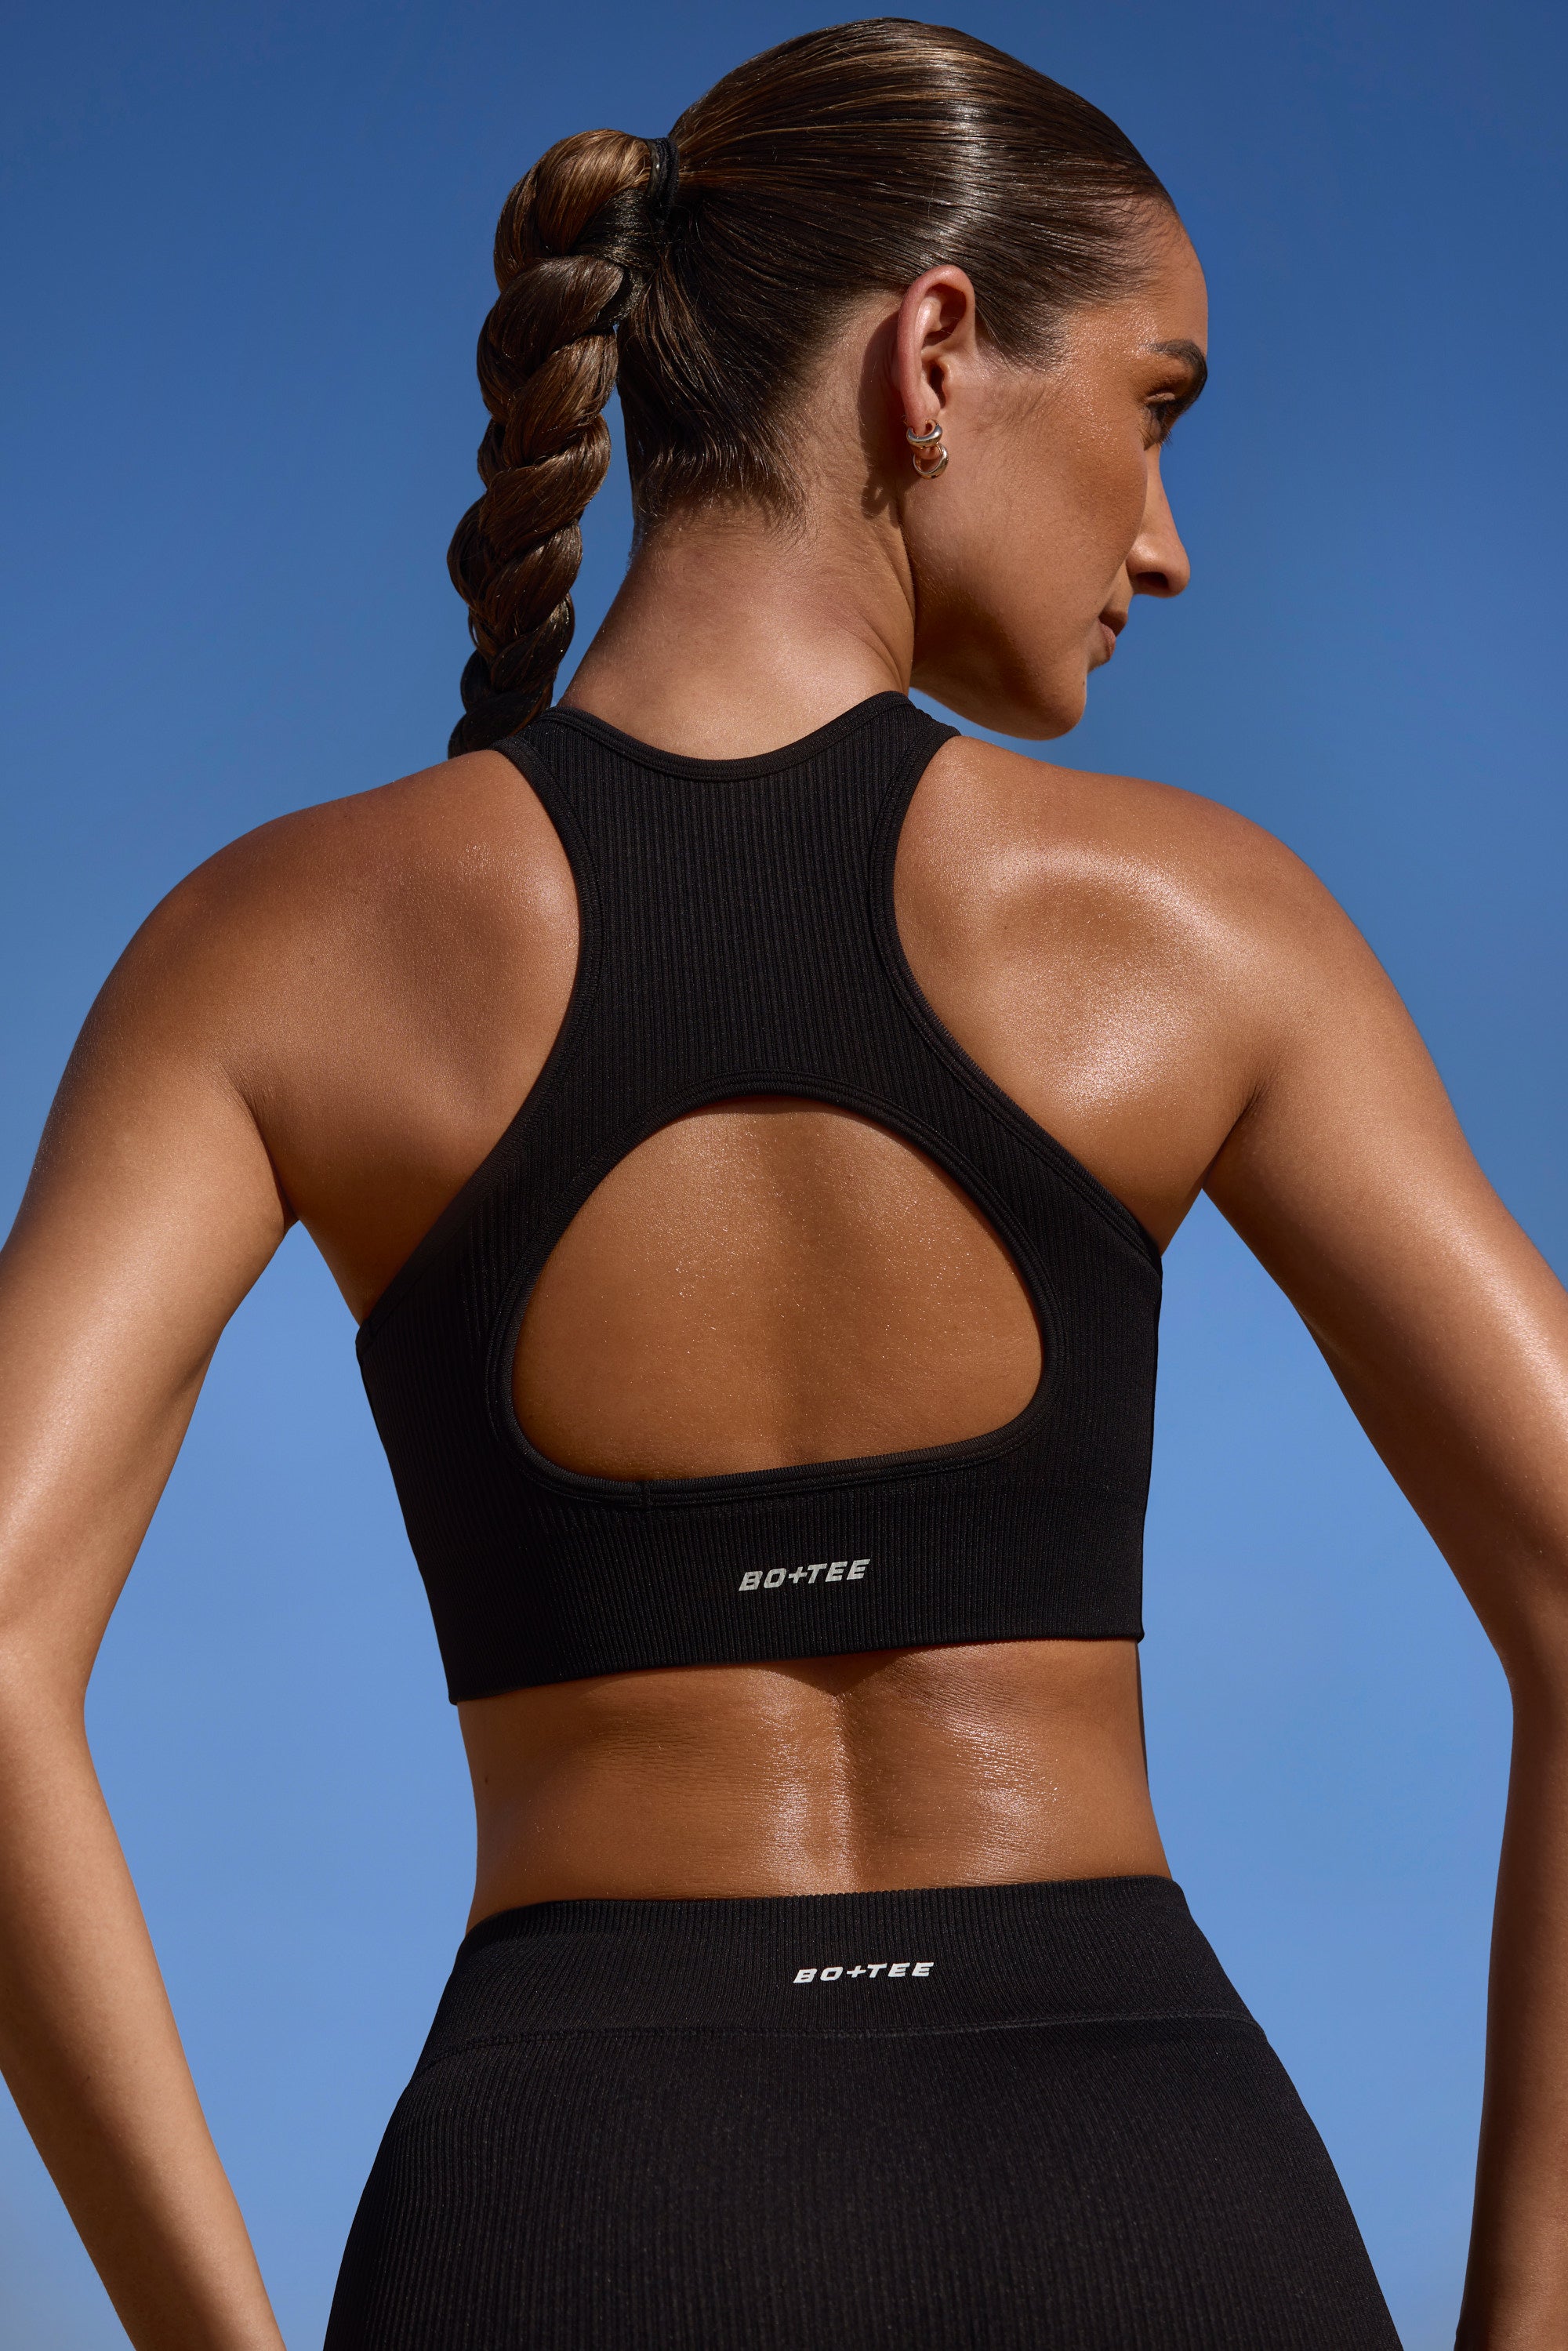 See Price in Bag $0 - $25 Nike One Sports Bras.